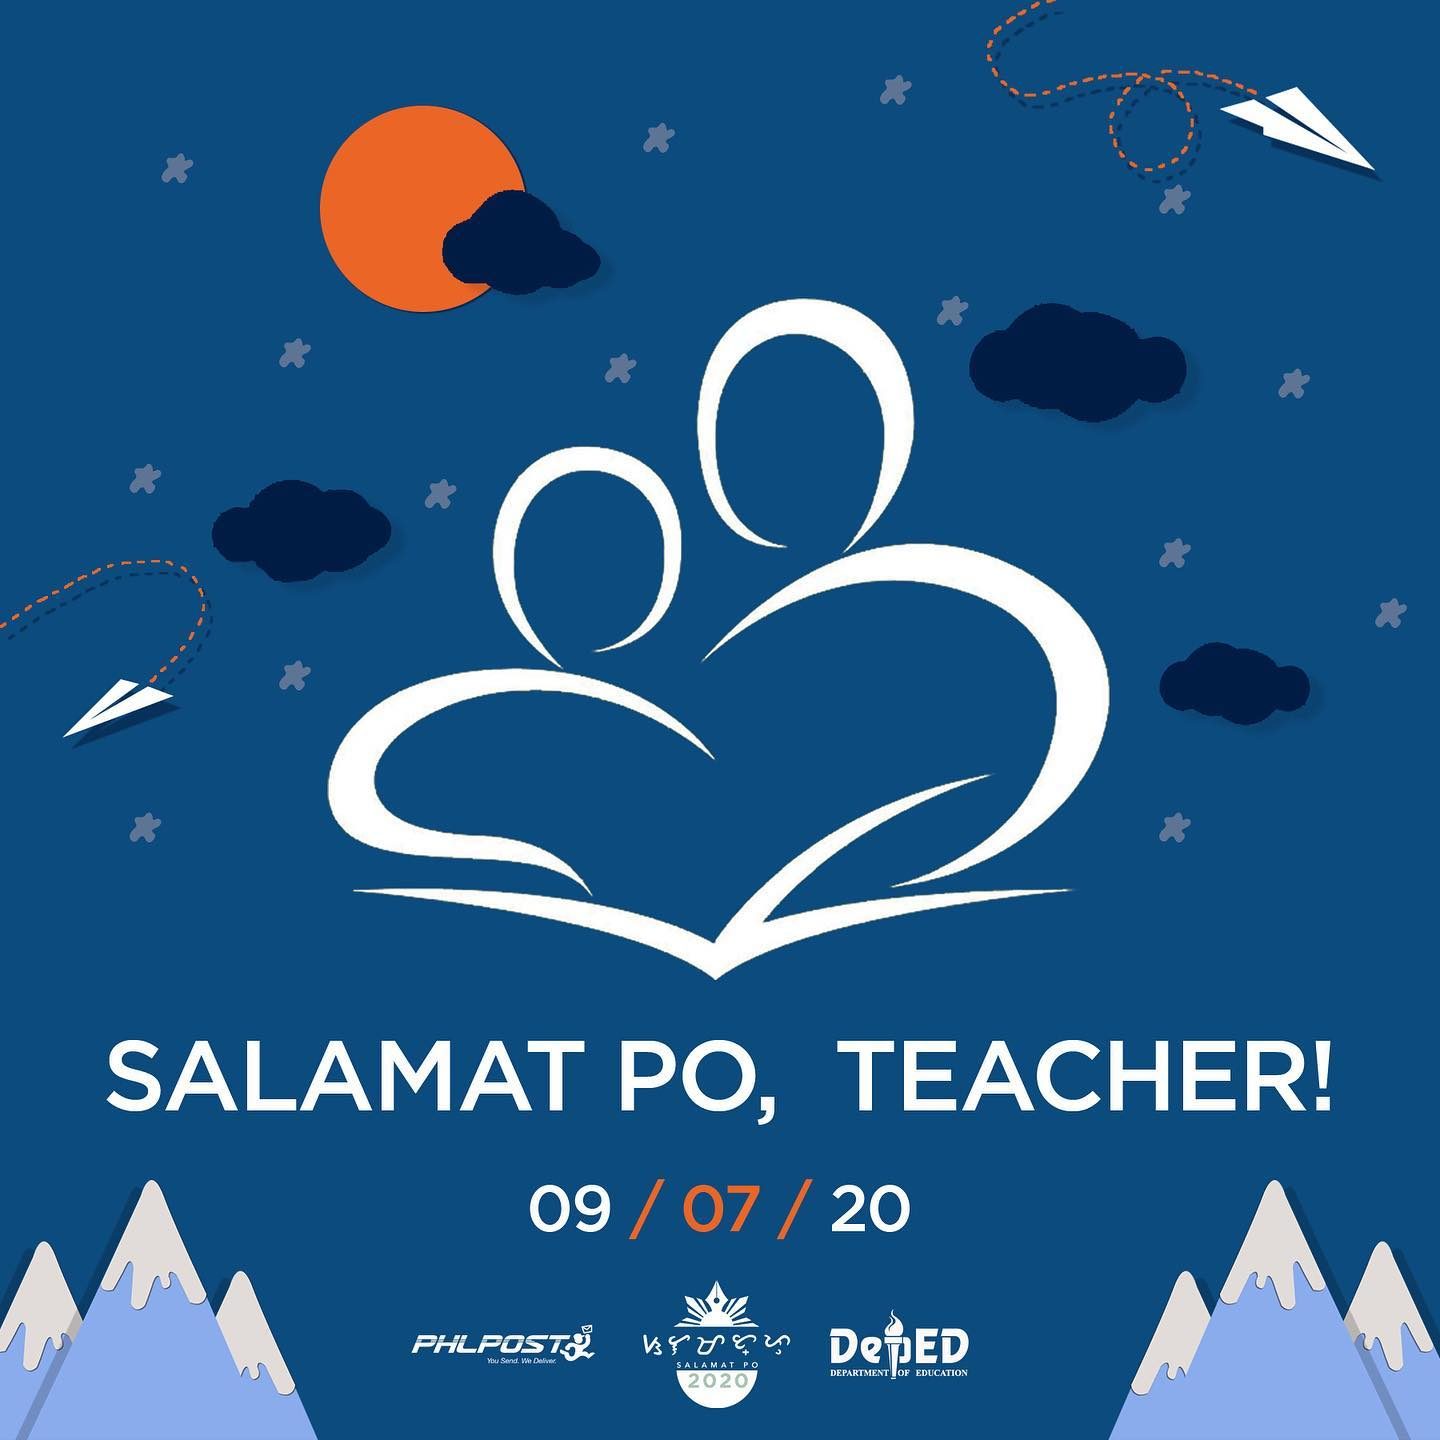 PHLPost releases Teachers’ Month stamps, urges students to write letters online